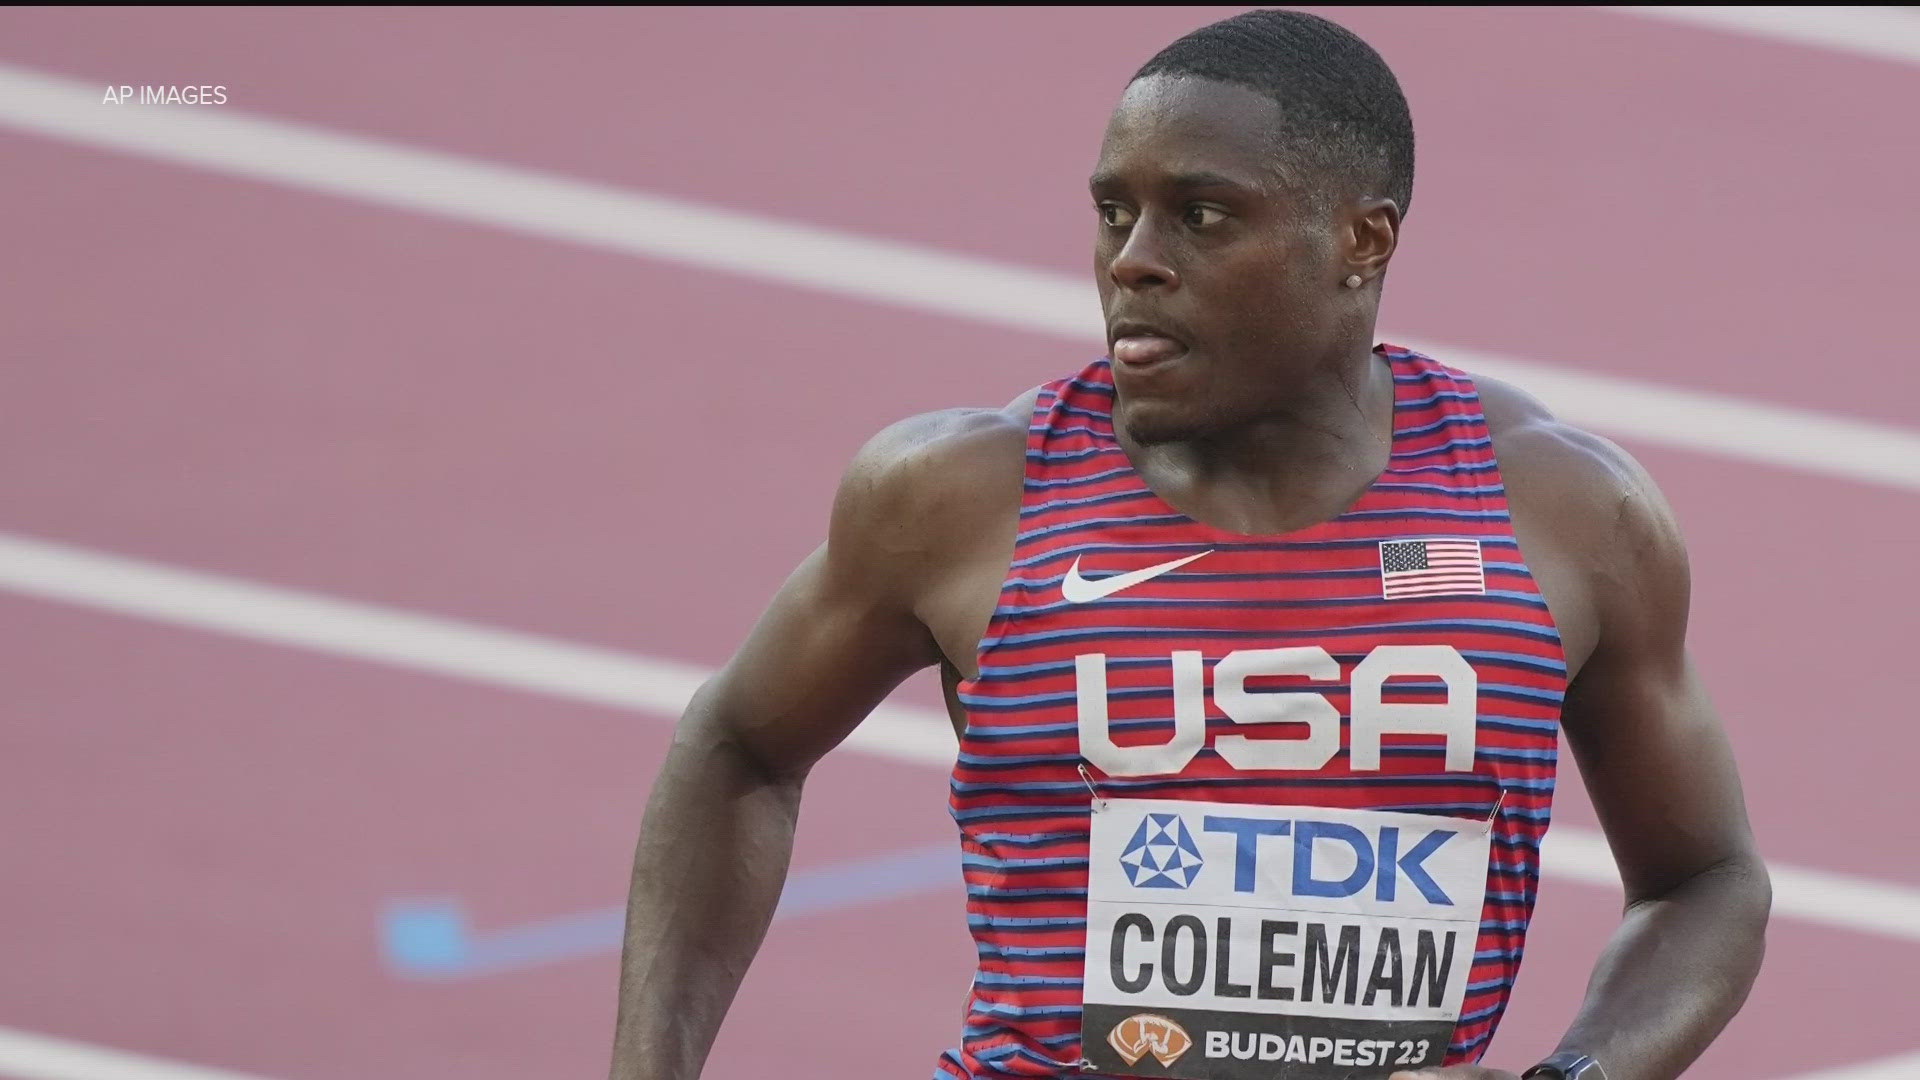 Christian Coleman holds the title "World's fastest man" and wants to keep it with a gold medal at the Summer Olympics.